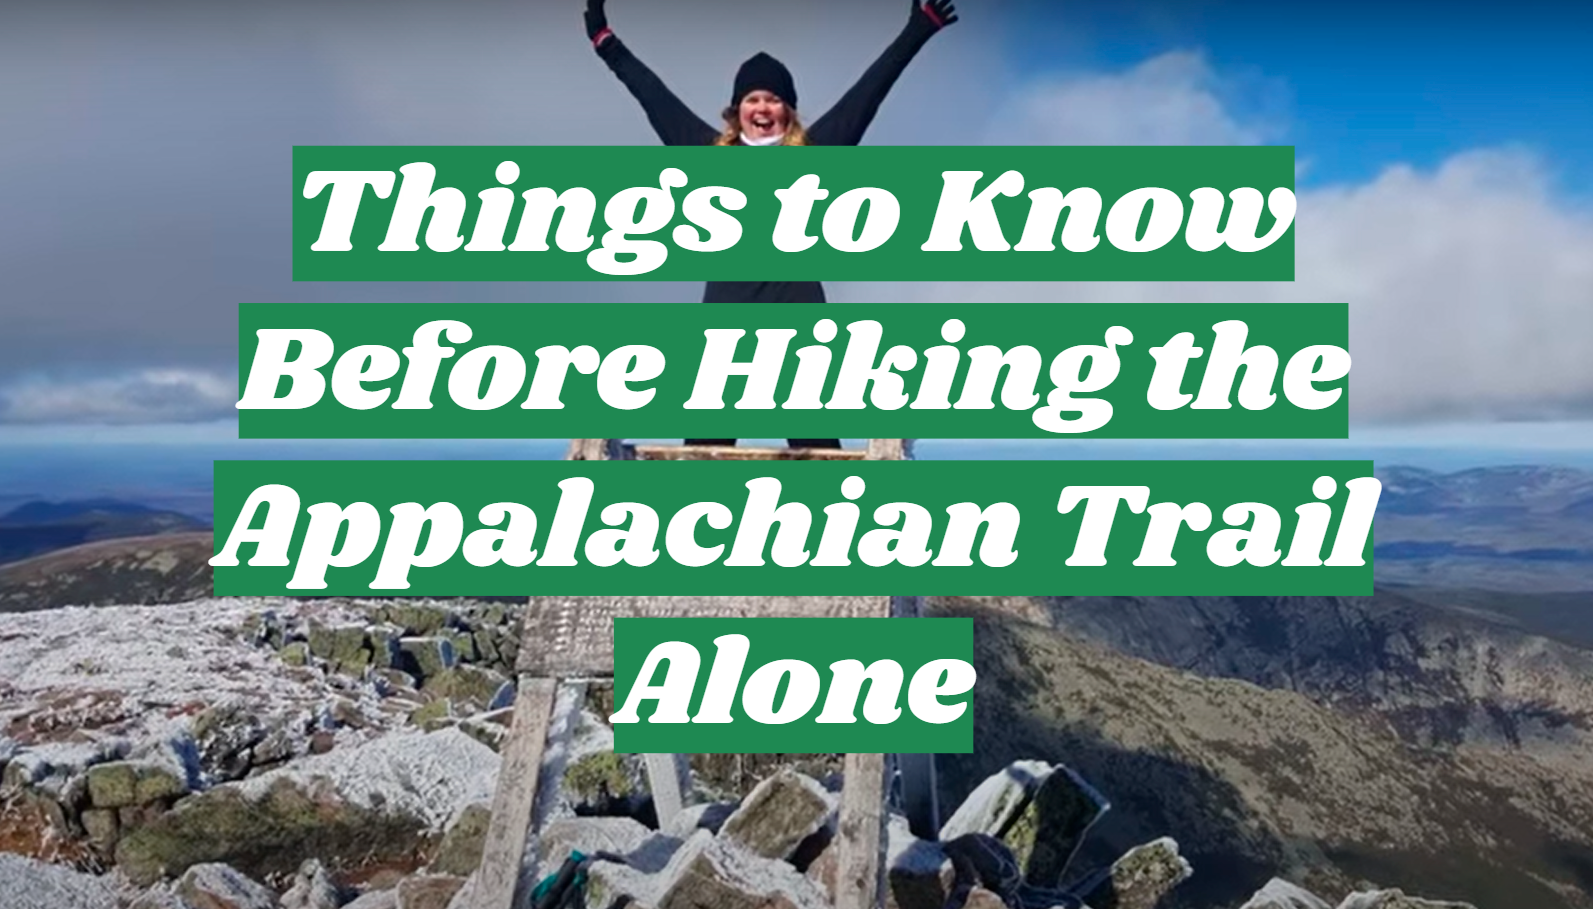 Things to Know Before Hiking the Appalachian Trail Alone